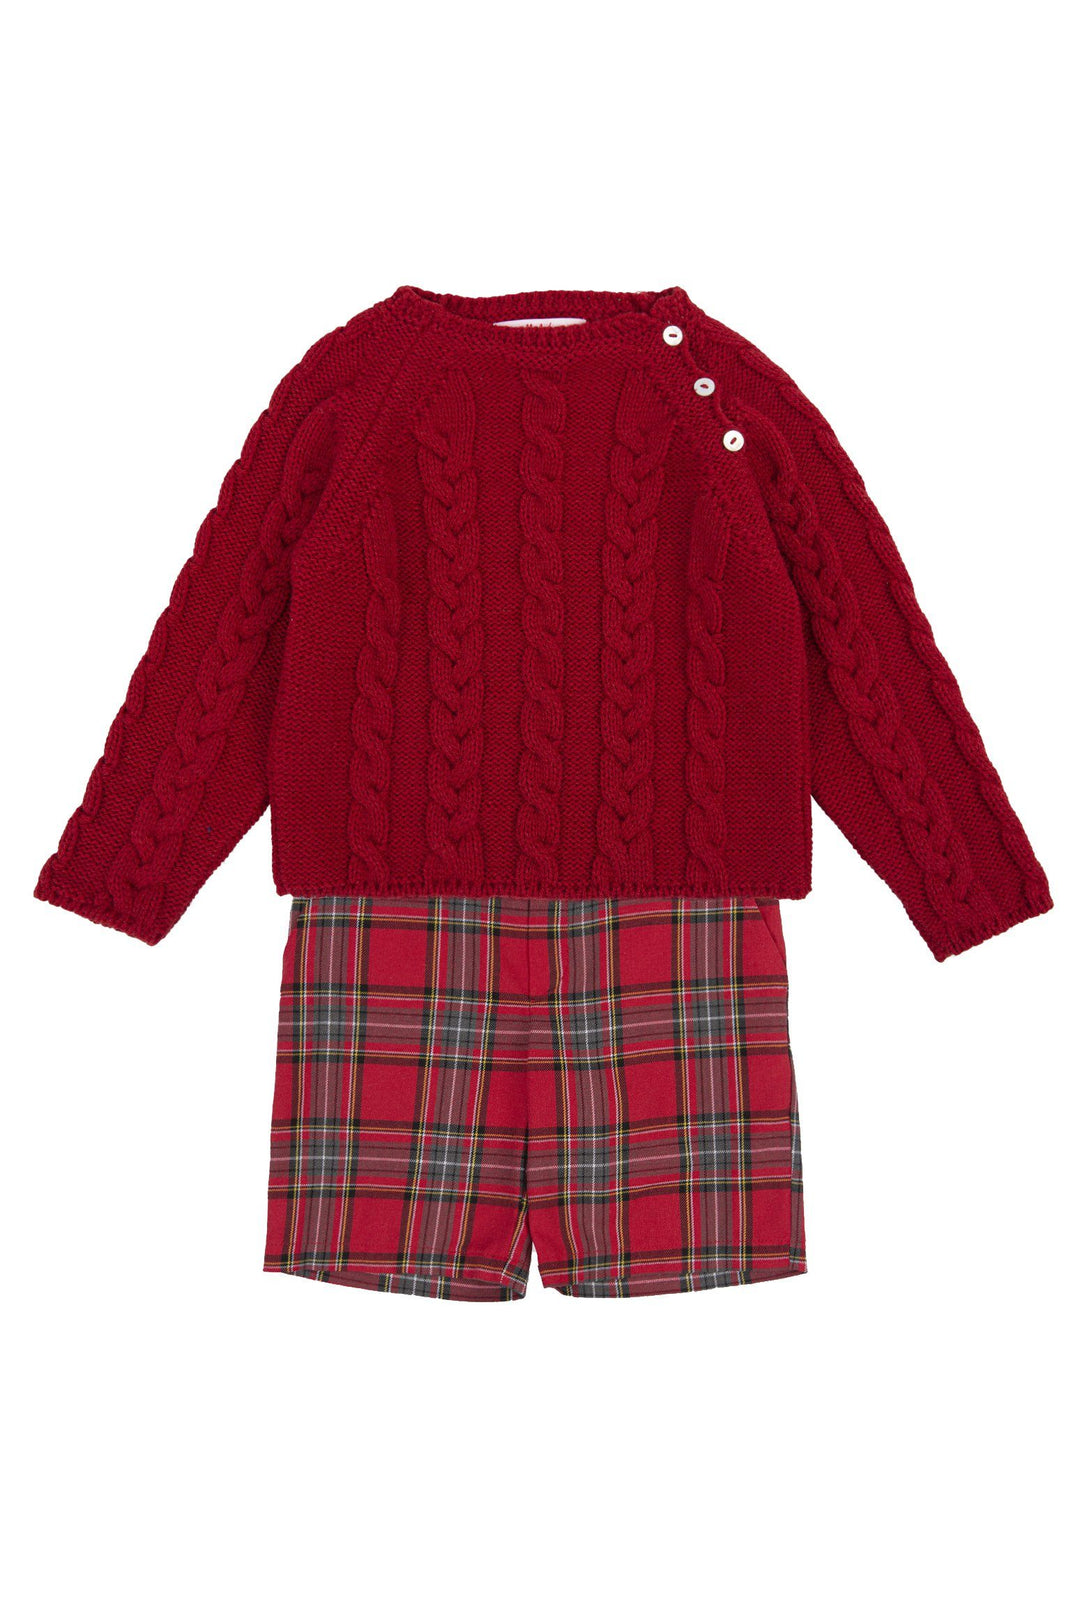 Tutto Piccolo "Nicolas" Red Cable Knit Jumper & Tartan Shorts | Millie and John